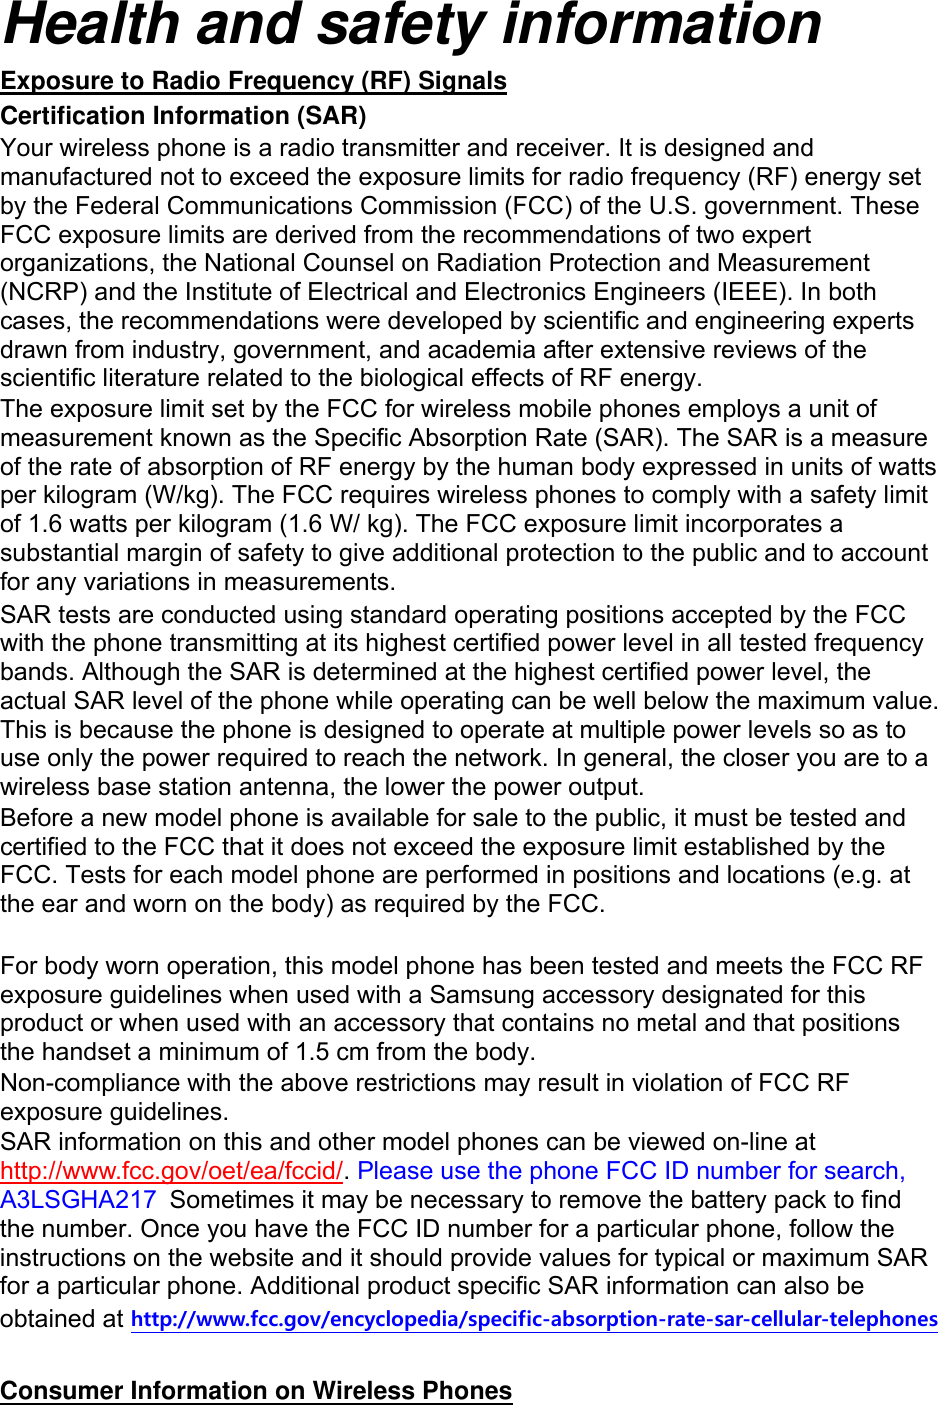 Health and safety information Exposure to Radio Frequency (RF) Signals Certification Information (SAR) Your wireless phone is a radio transmitter and receiver. It is designed and manufactured not to exceed the exposure limits for radio frequency (RF) energy set by the Federal Communications Commission (FCC) of the U.S. government. These FCC exposure limits are derived from the recommendations of two expert organizations, the National Counsel on Radiation Protection and Measurement (NCRP) and the Institute of Electrical and Electronics Engineers (IEEE). In both cases, the recommendations were developed by scientific and engineering experts drawn from industry, government, and academia after extensive reviews of the scientific literature related to the biological effects of RF energy. The exposure limit set by the FCC for wireless mobile phones employs a unit of measurement known as the Specific Absorption Rate (SAR). The SAR is a measure of the rate of absorption of RF energy by the human body expressed in units of watts per kilogram (W/kg). The FCC requires wireless phones to comply with a safety limit of 1.6 watts per kilogram (1.6 W/ kg). The FCC exposure limit incorporates a substantial margin of safety to give additional protection to the public and to account for any variations in measurements. SAR tests are conducted using standard operating positions accepted by the FCC with the phone transmitting at its highest certified power level in all tested frequency bands. Although the SAR is determined at the highest certified power level, the actual SAR level of the phone while operating can be well below the maximum value. This is because the phone is designed to operate at multiple power levels so as to use only the power required to reach the network. In general, the closer you are to a wireless base station antenna, the lower the power output. Before a new model phone is available for sale to the public, it must be tested and certified to the FCC that it does not exceed the exposure limit established by the FCC. Tests for each model phone are performed in positions and locations (e.g. at the ear and worn on the body) as required by the FCC.      For body worn operation, this model phone has been tested and meets the FCC RF exposure guidelines when used with a Samsung accessory designated for this product or when used with an accessory that contains no metal and that positions the handset a minimum of 1.5 cm from the body.   Non-compliance with the above restrictions may result in violation of FCC RF exposure guidelines. SAR information on this and other model phones can be viewed on-line at http://www.fcc.gov/oet/ea/fccid/. Please use the phone FCC ID number for search, A3LSGHA217  Sometimes it may be necessary to remove the battery pack to find the number. Once you have the FCC ID number for a particular phone, follow the instructions on the website and it should provide values for typical or maximum SAR for a particular phone. Additional product specific SAR information can also be obtained at http://www.fcc.gov/encyclopedia/specific-absorption-rate-sar-cellular-telephones  Consumer Information on Wireless Phones 